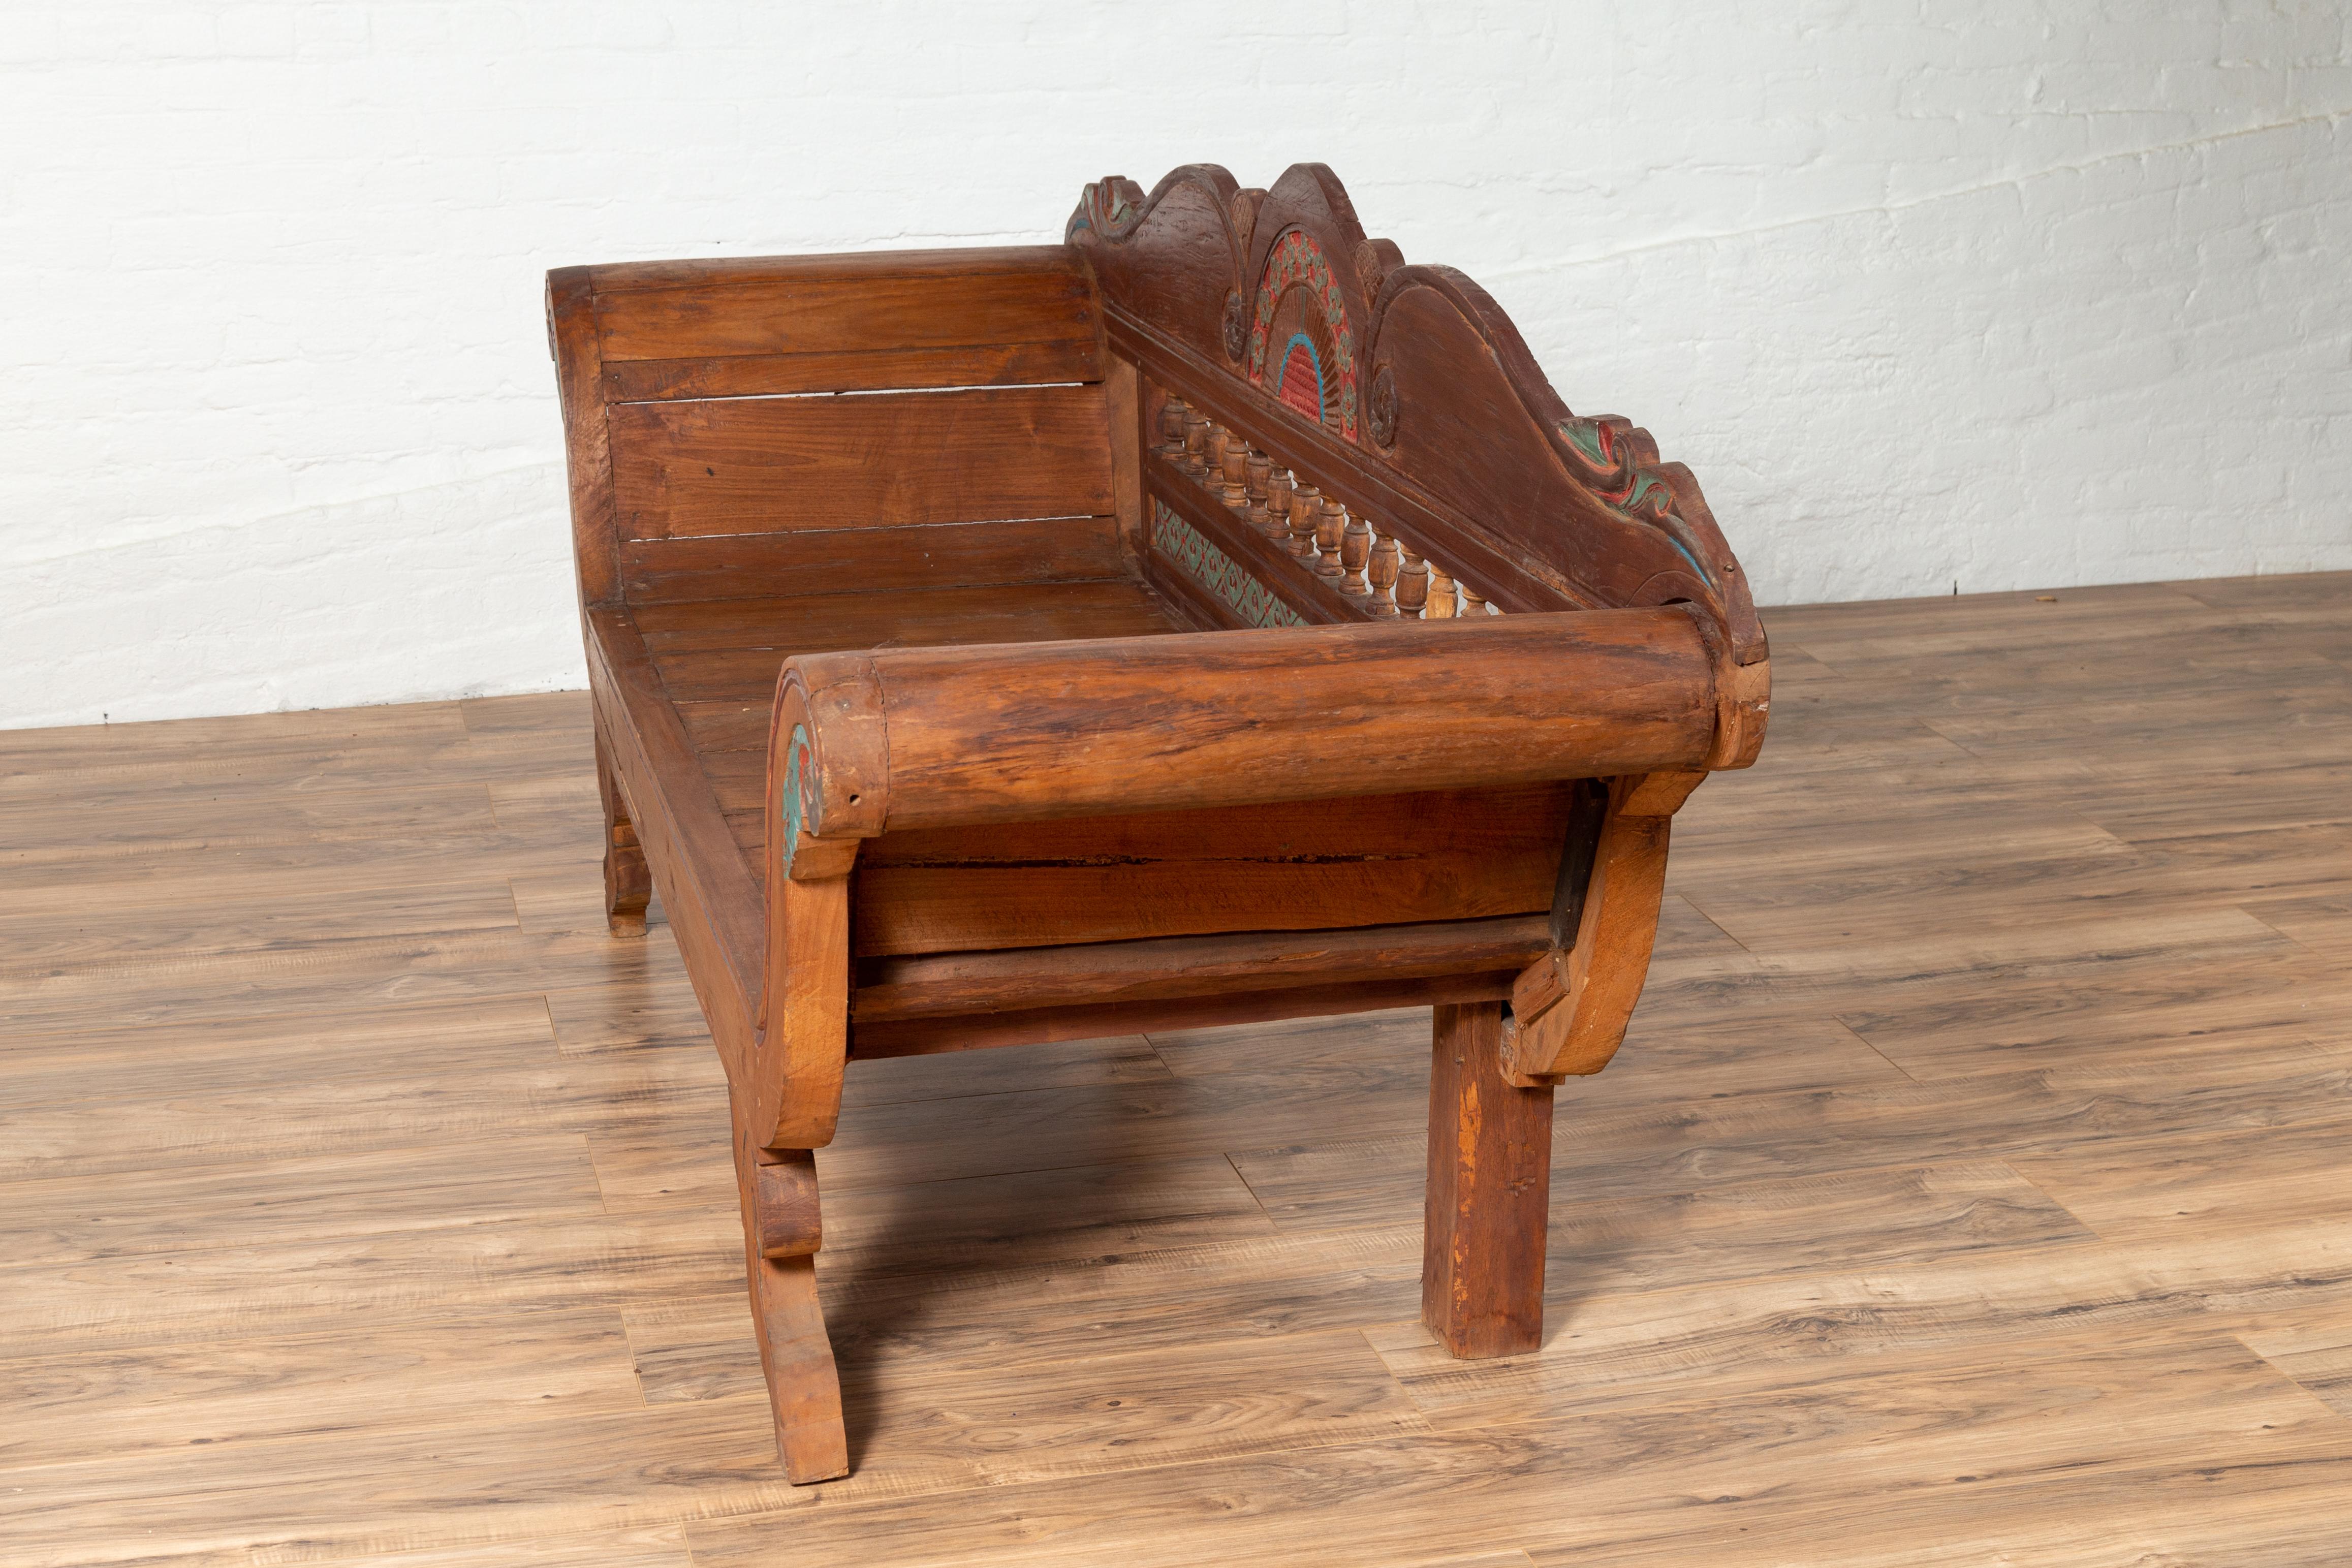 Plantation Javanese Teak Settee with Polychrome Décor and Out-Scrolling Arms For Sale 10